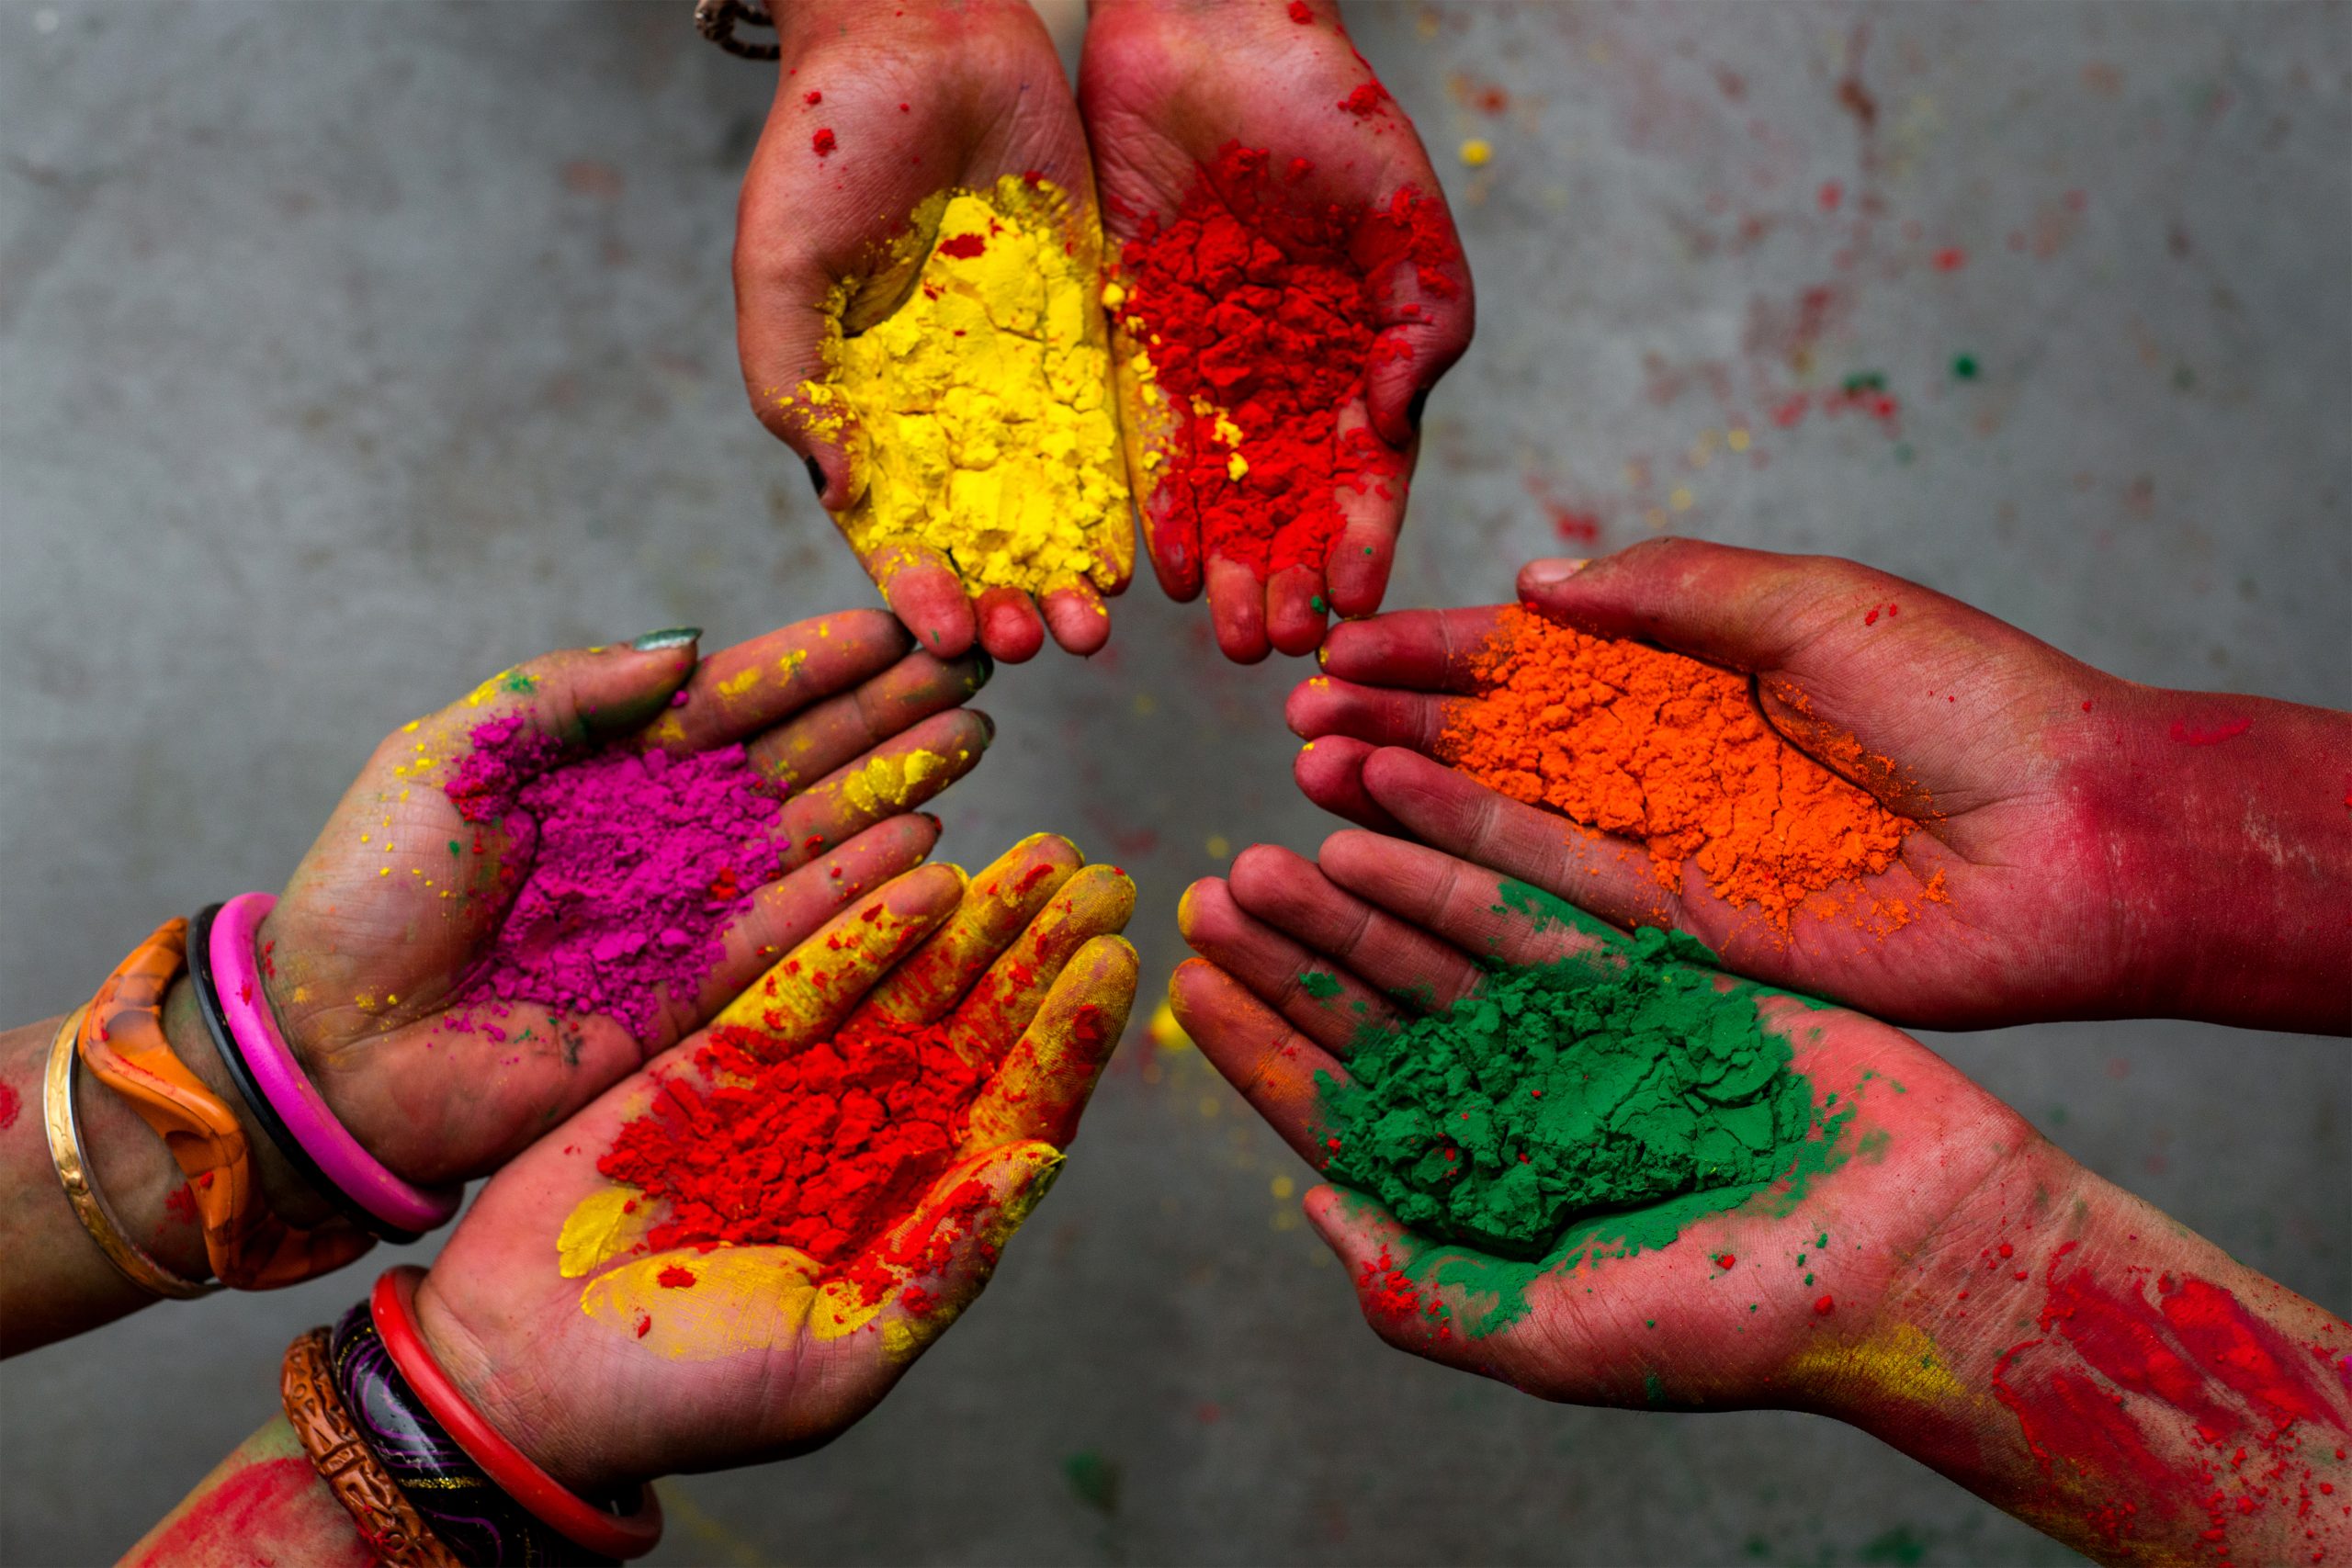 Some hands showing color powder during Holi festival in India.